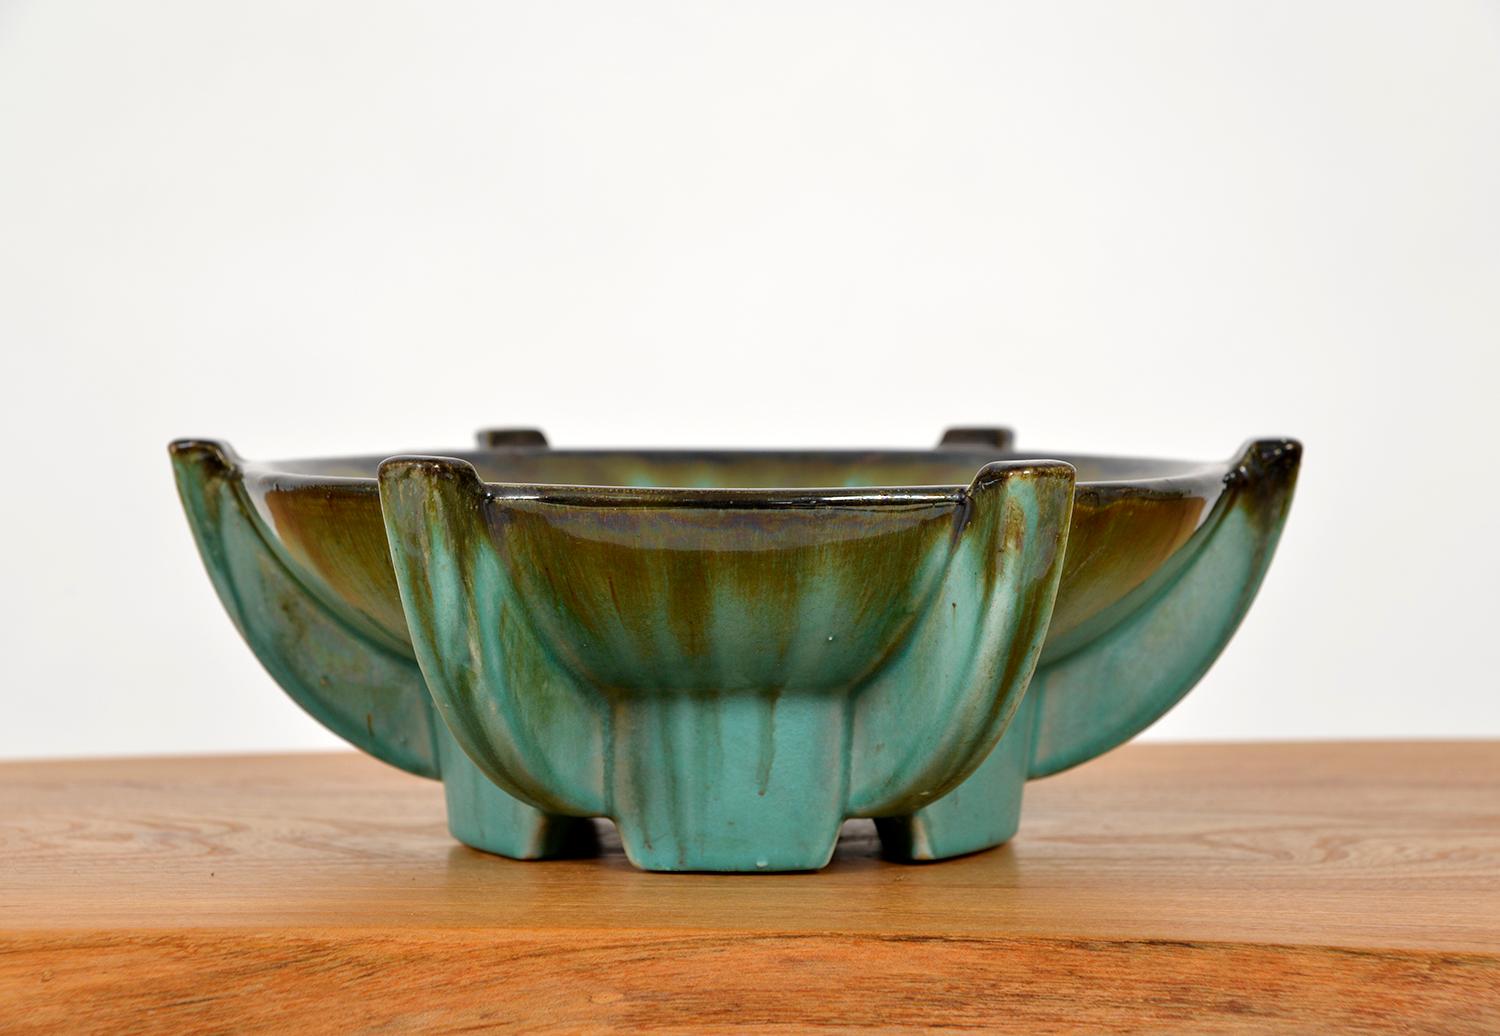 Belgian 1930s Art Deco Modernist Faience Tazza by Thulin Pottery Belgium Centrepiece For Sale